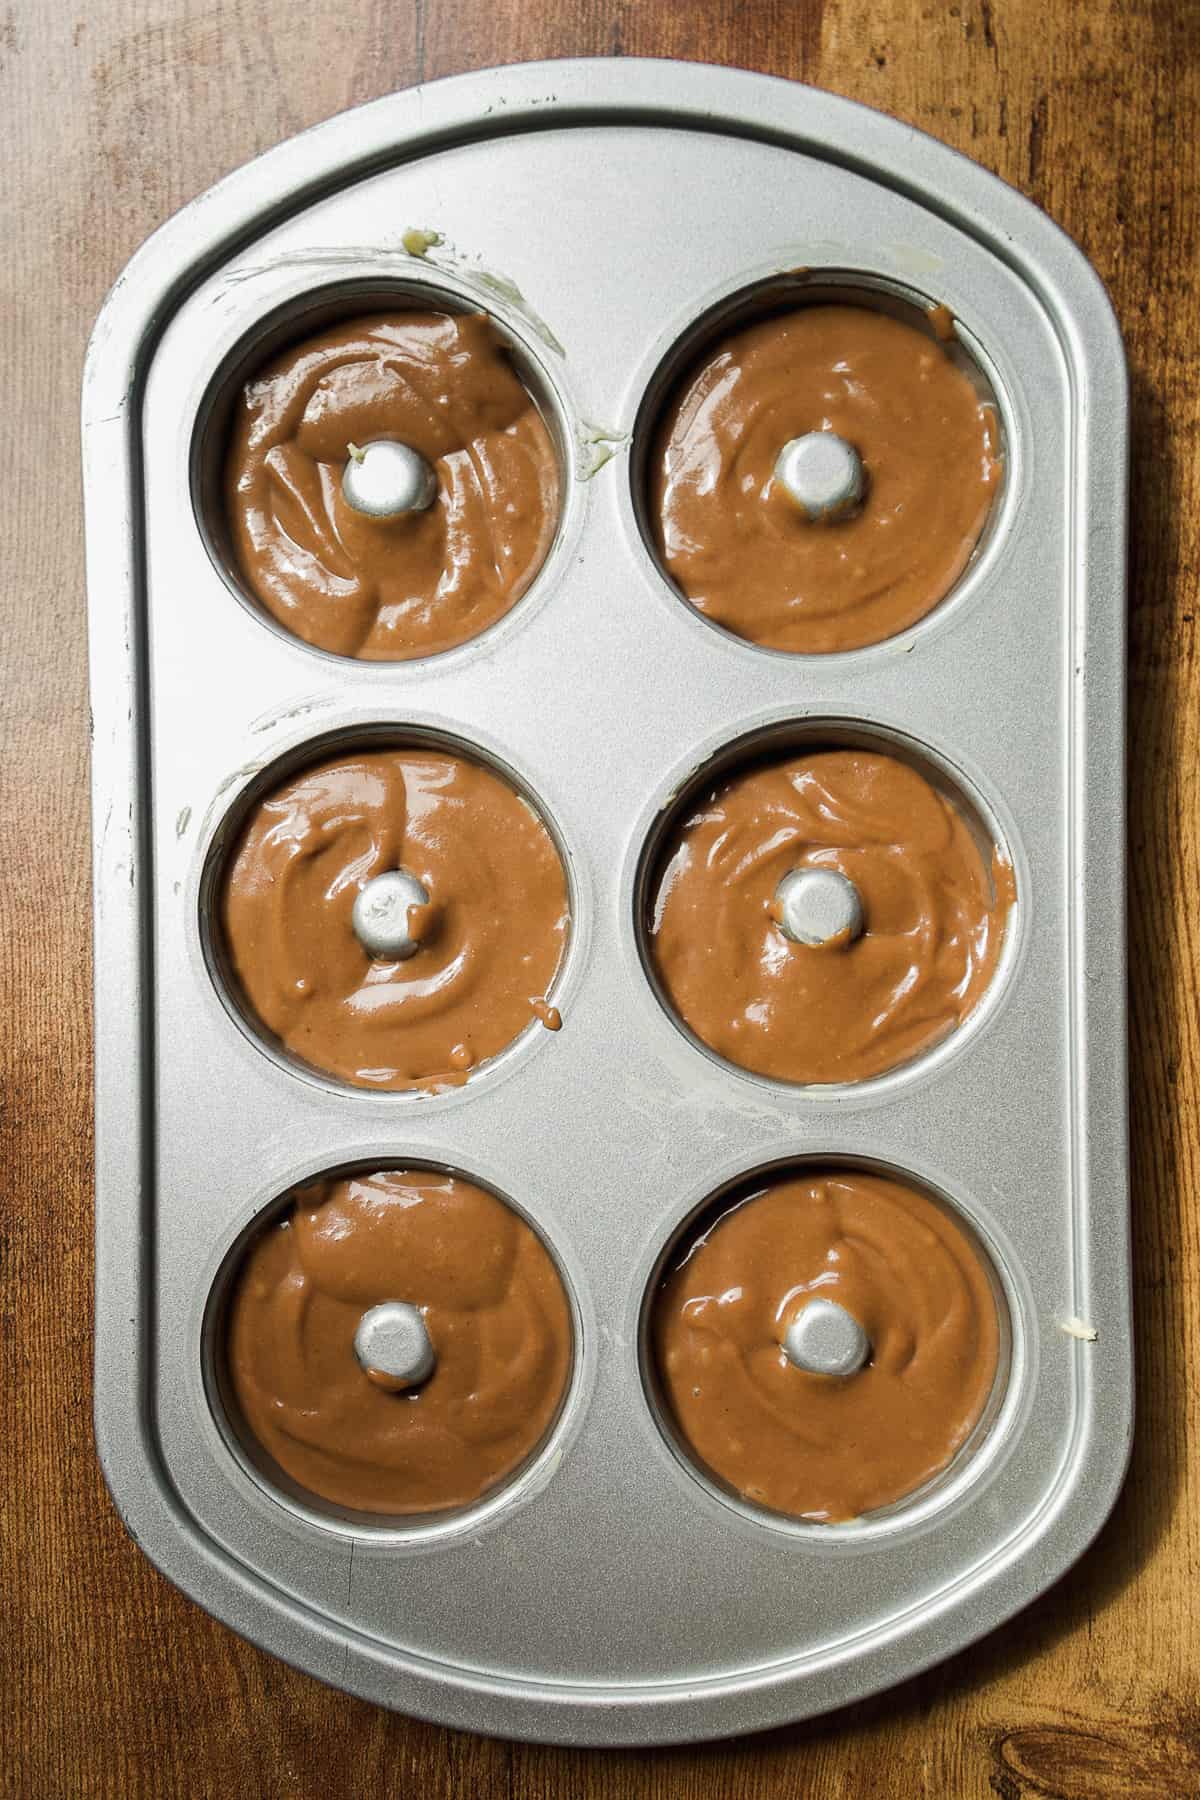 Coffee doughnuts about to be baked in the oven.